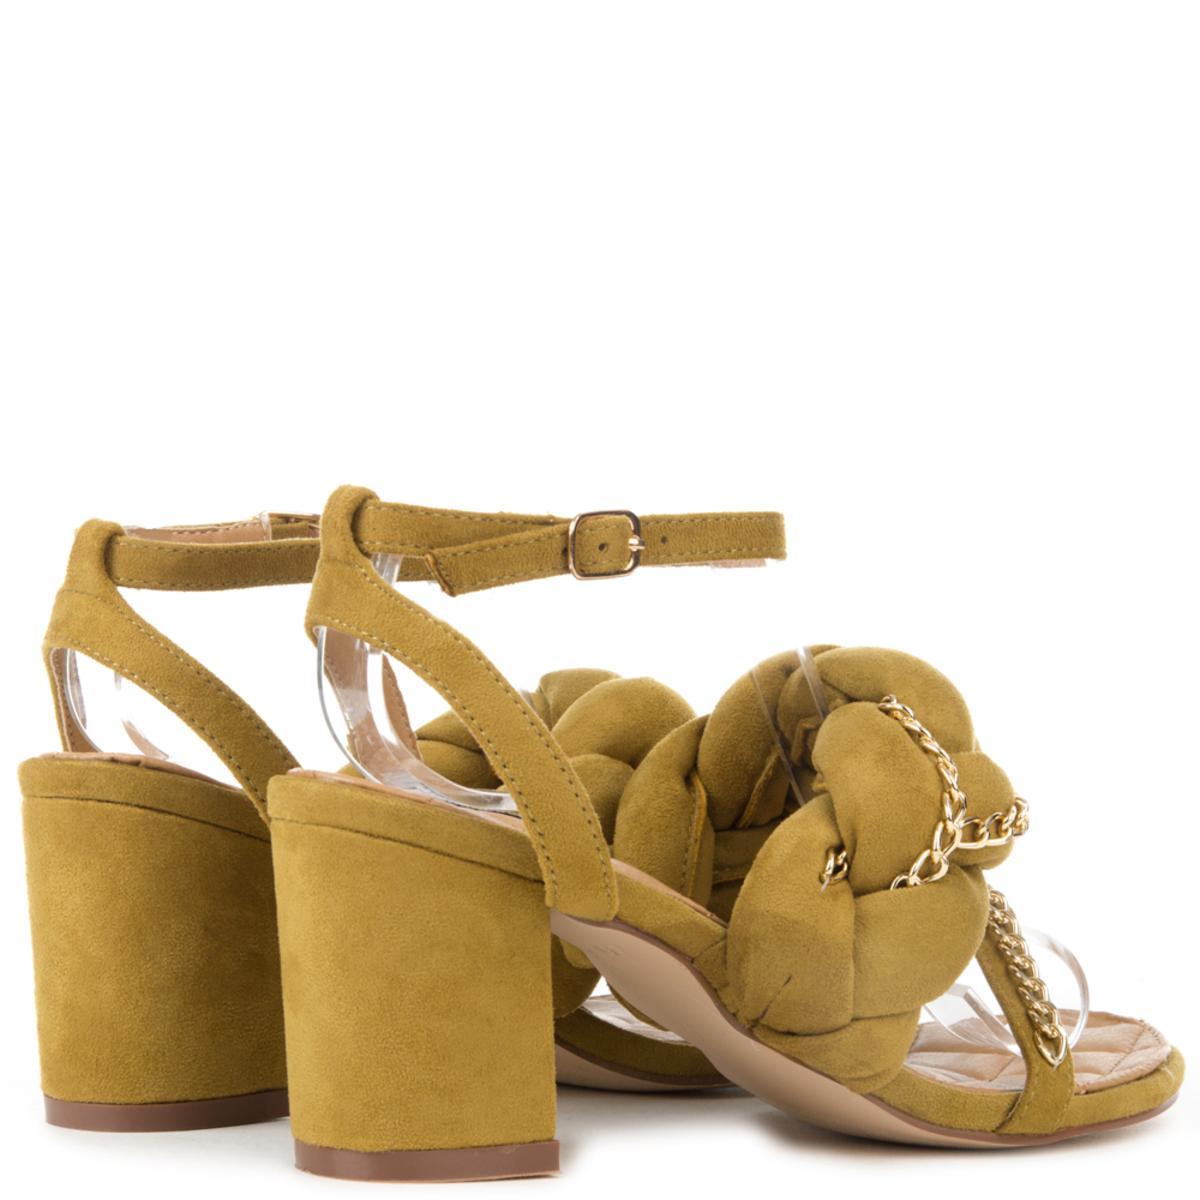 Cape Robbin Carrie-23 Olive High Heel Olive